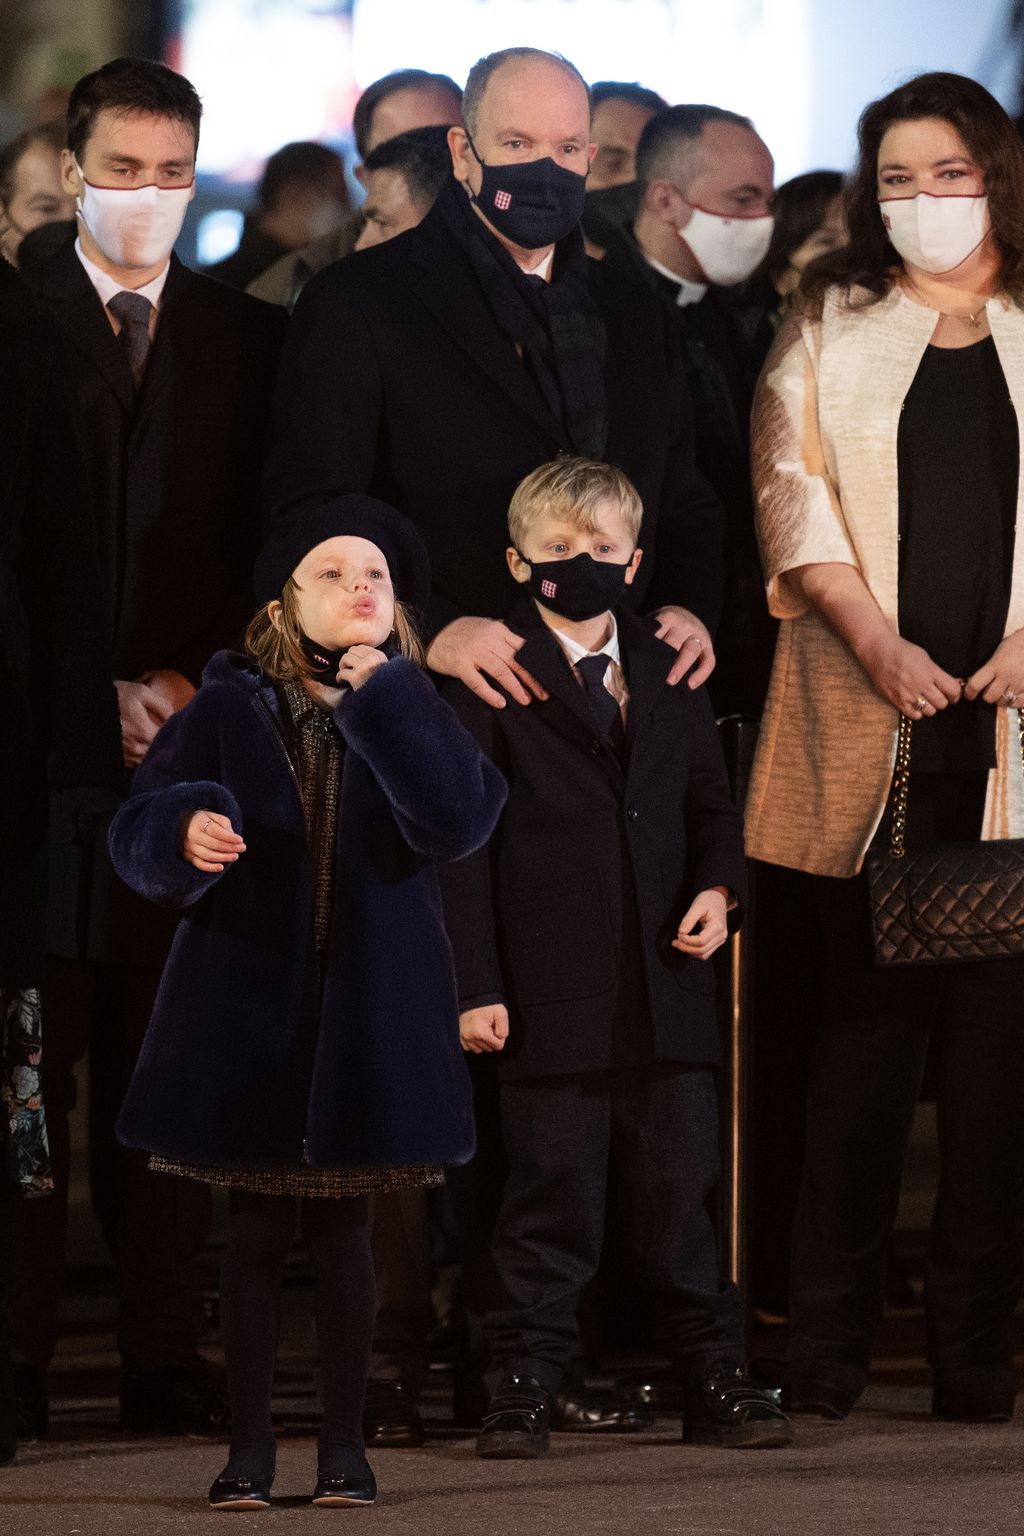 Prince Albert, Melanie-Antoinette de Massy and Prince Jacques and Princess Gabriella in a crowd